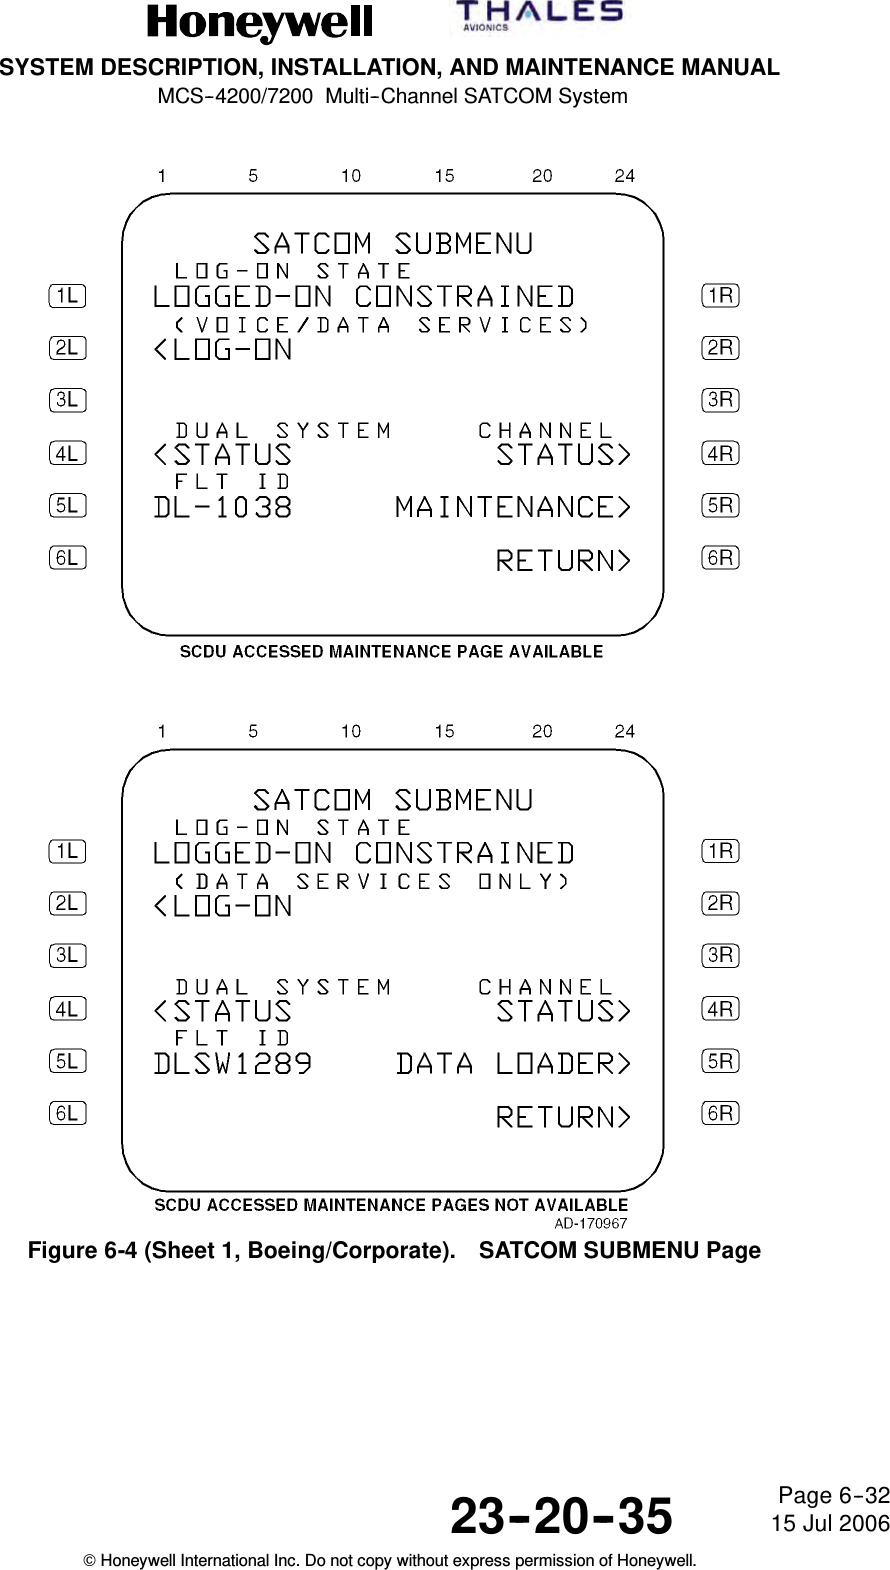 SYSTEM DESCRIPTION, INSTALLATION, AND MAINTENANCE MANUALMCS--4200/7200 Multi--Channel SATCOM System23--20--35 15 Jul 2006Honeywell International Inc. Do not copy without express permission of Honeywell.Page 6--32Figure 6-4 (Sheet 1, Boeing/Corporate). SATCOM SUBMENU Page